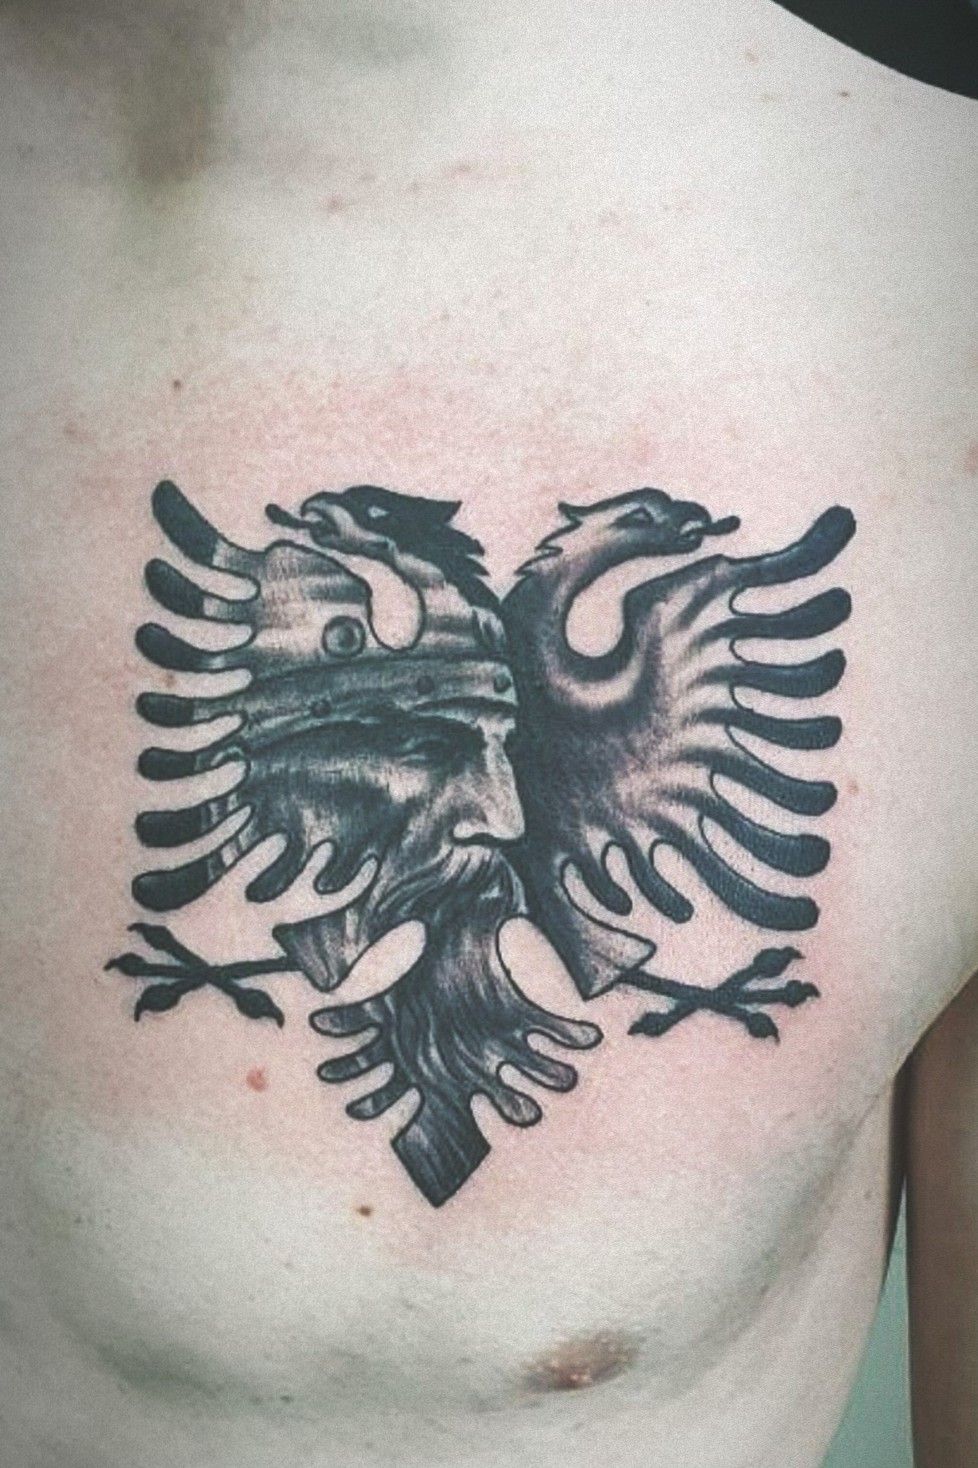 Rob Corsino did this Albanian eagle with the American flag inside it last  night for Chris  By Black Cherry Tattoo Studios  Facebook